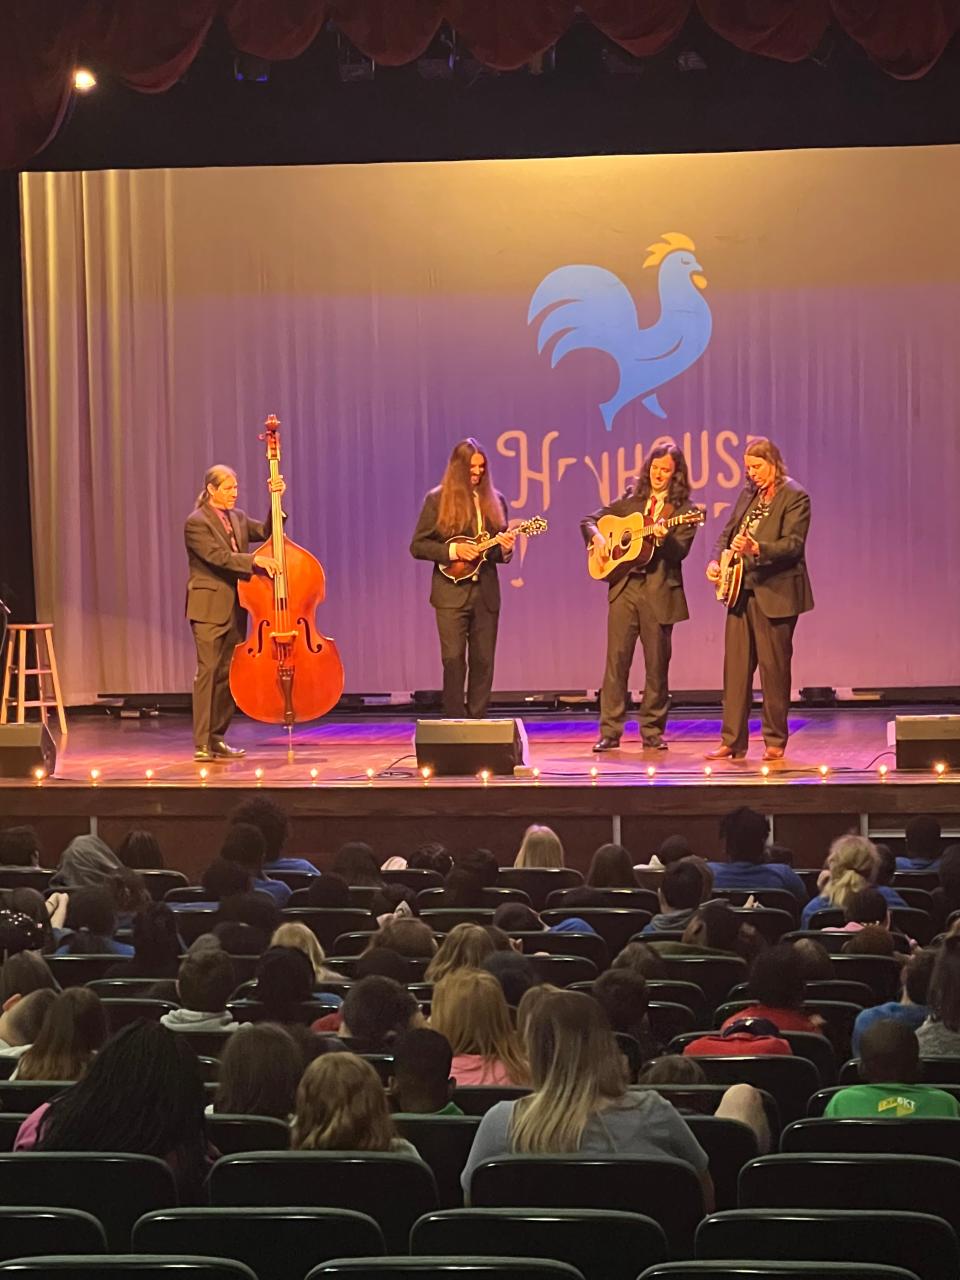 The Henhouse Prowlers, a Chicago-based bluegrass band, take the stage at the Don Gibson Theater Tuesday. The band conducted an educational program for fourth grade students.